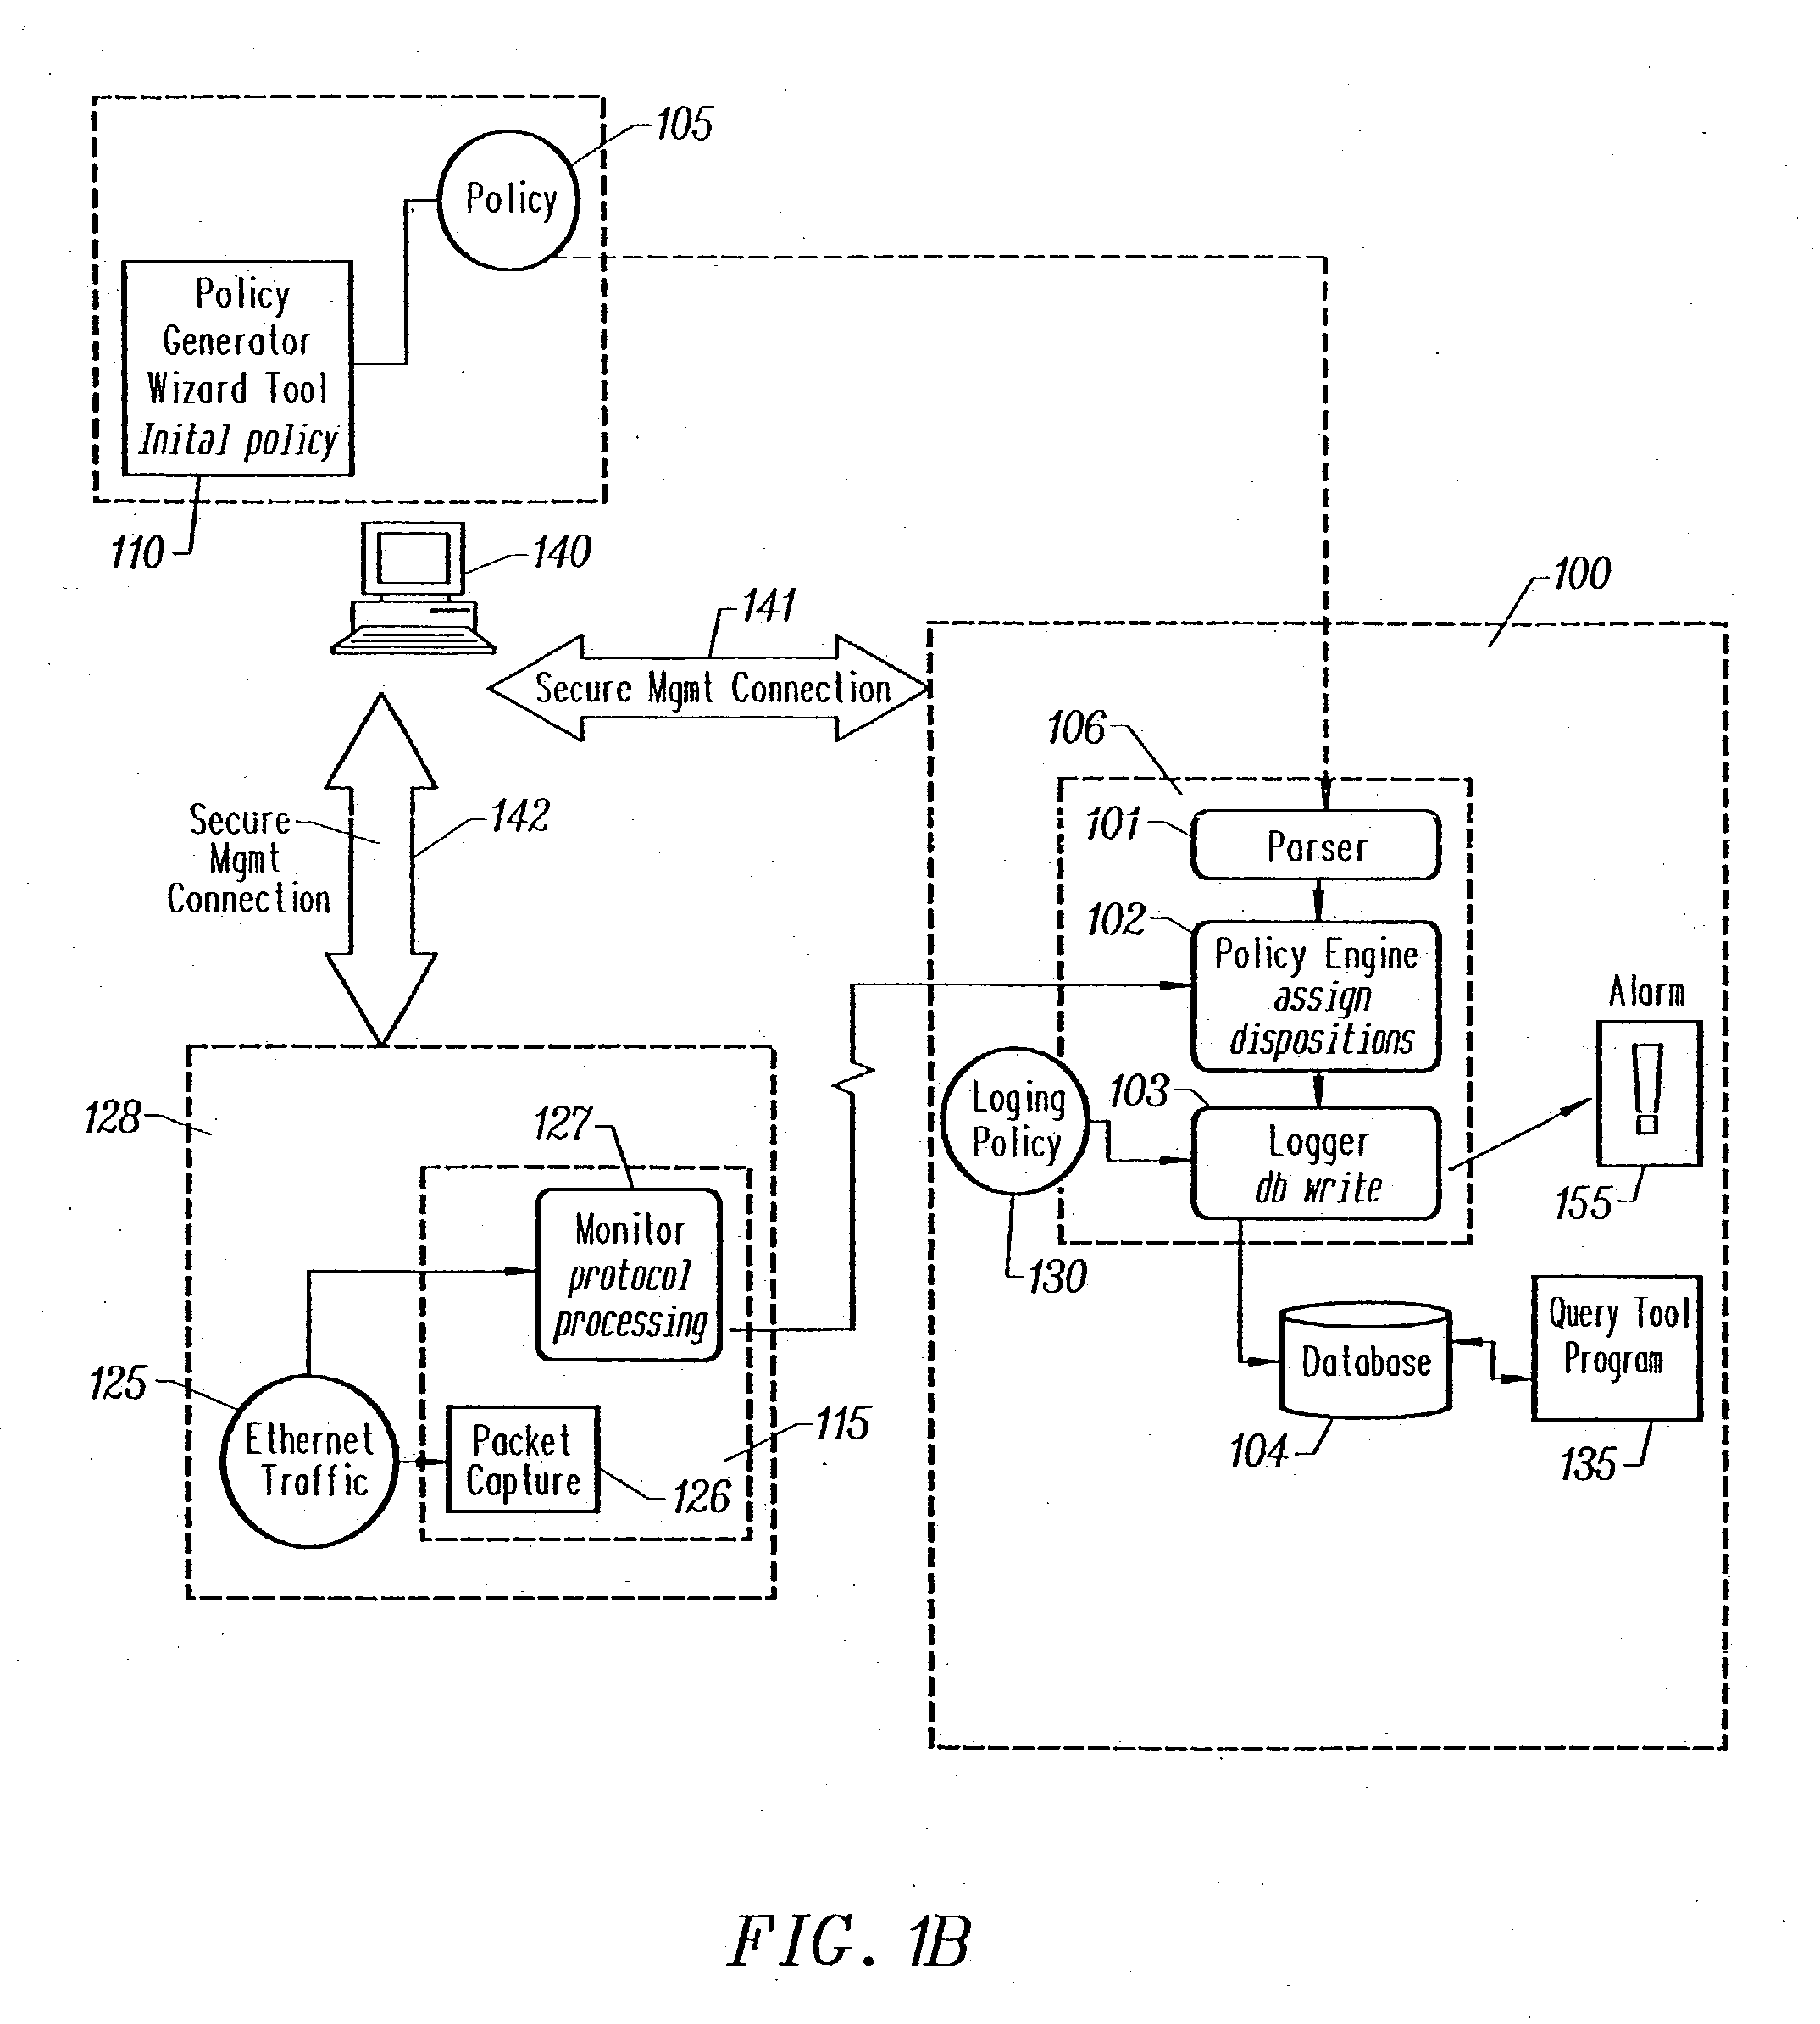 Method and apparatus for enterprise management